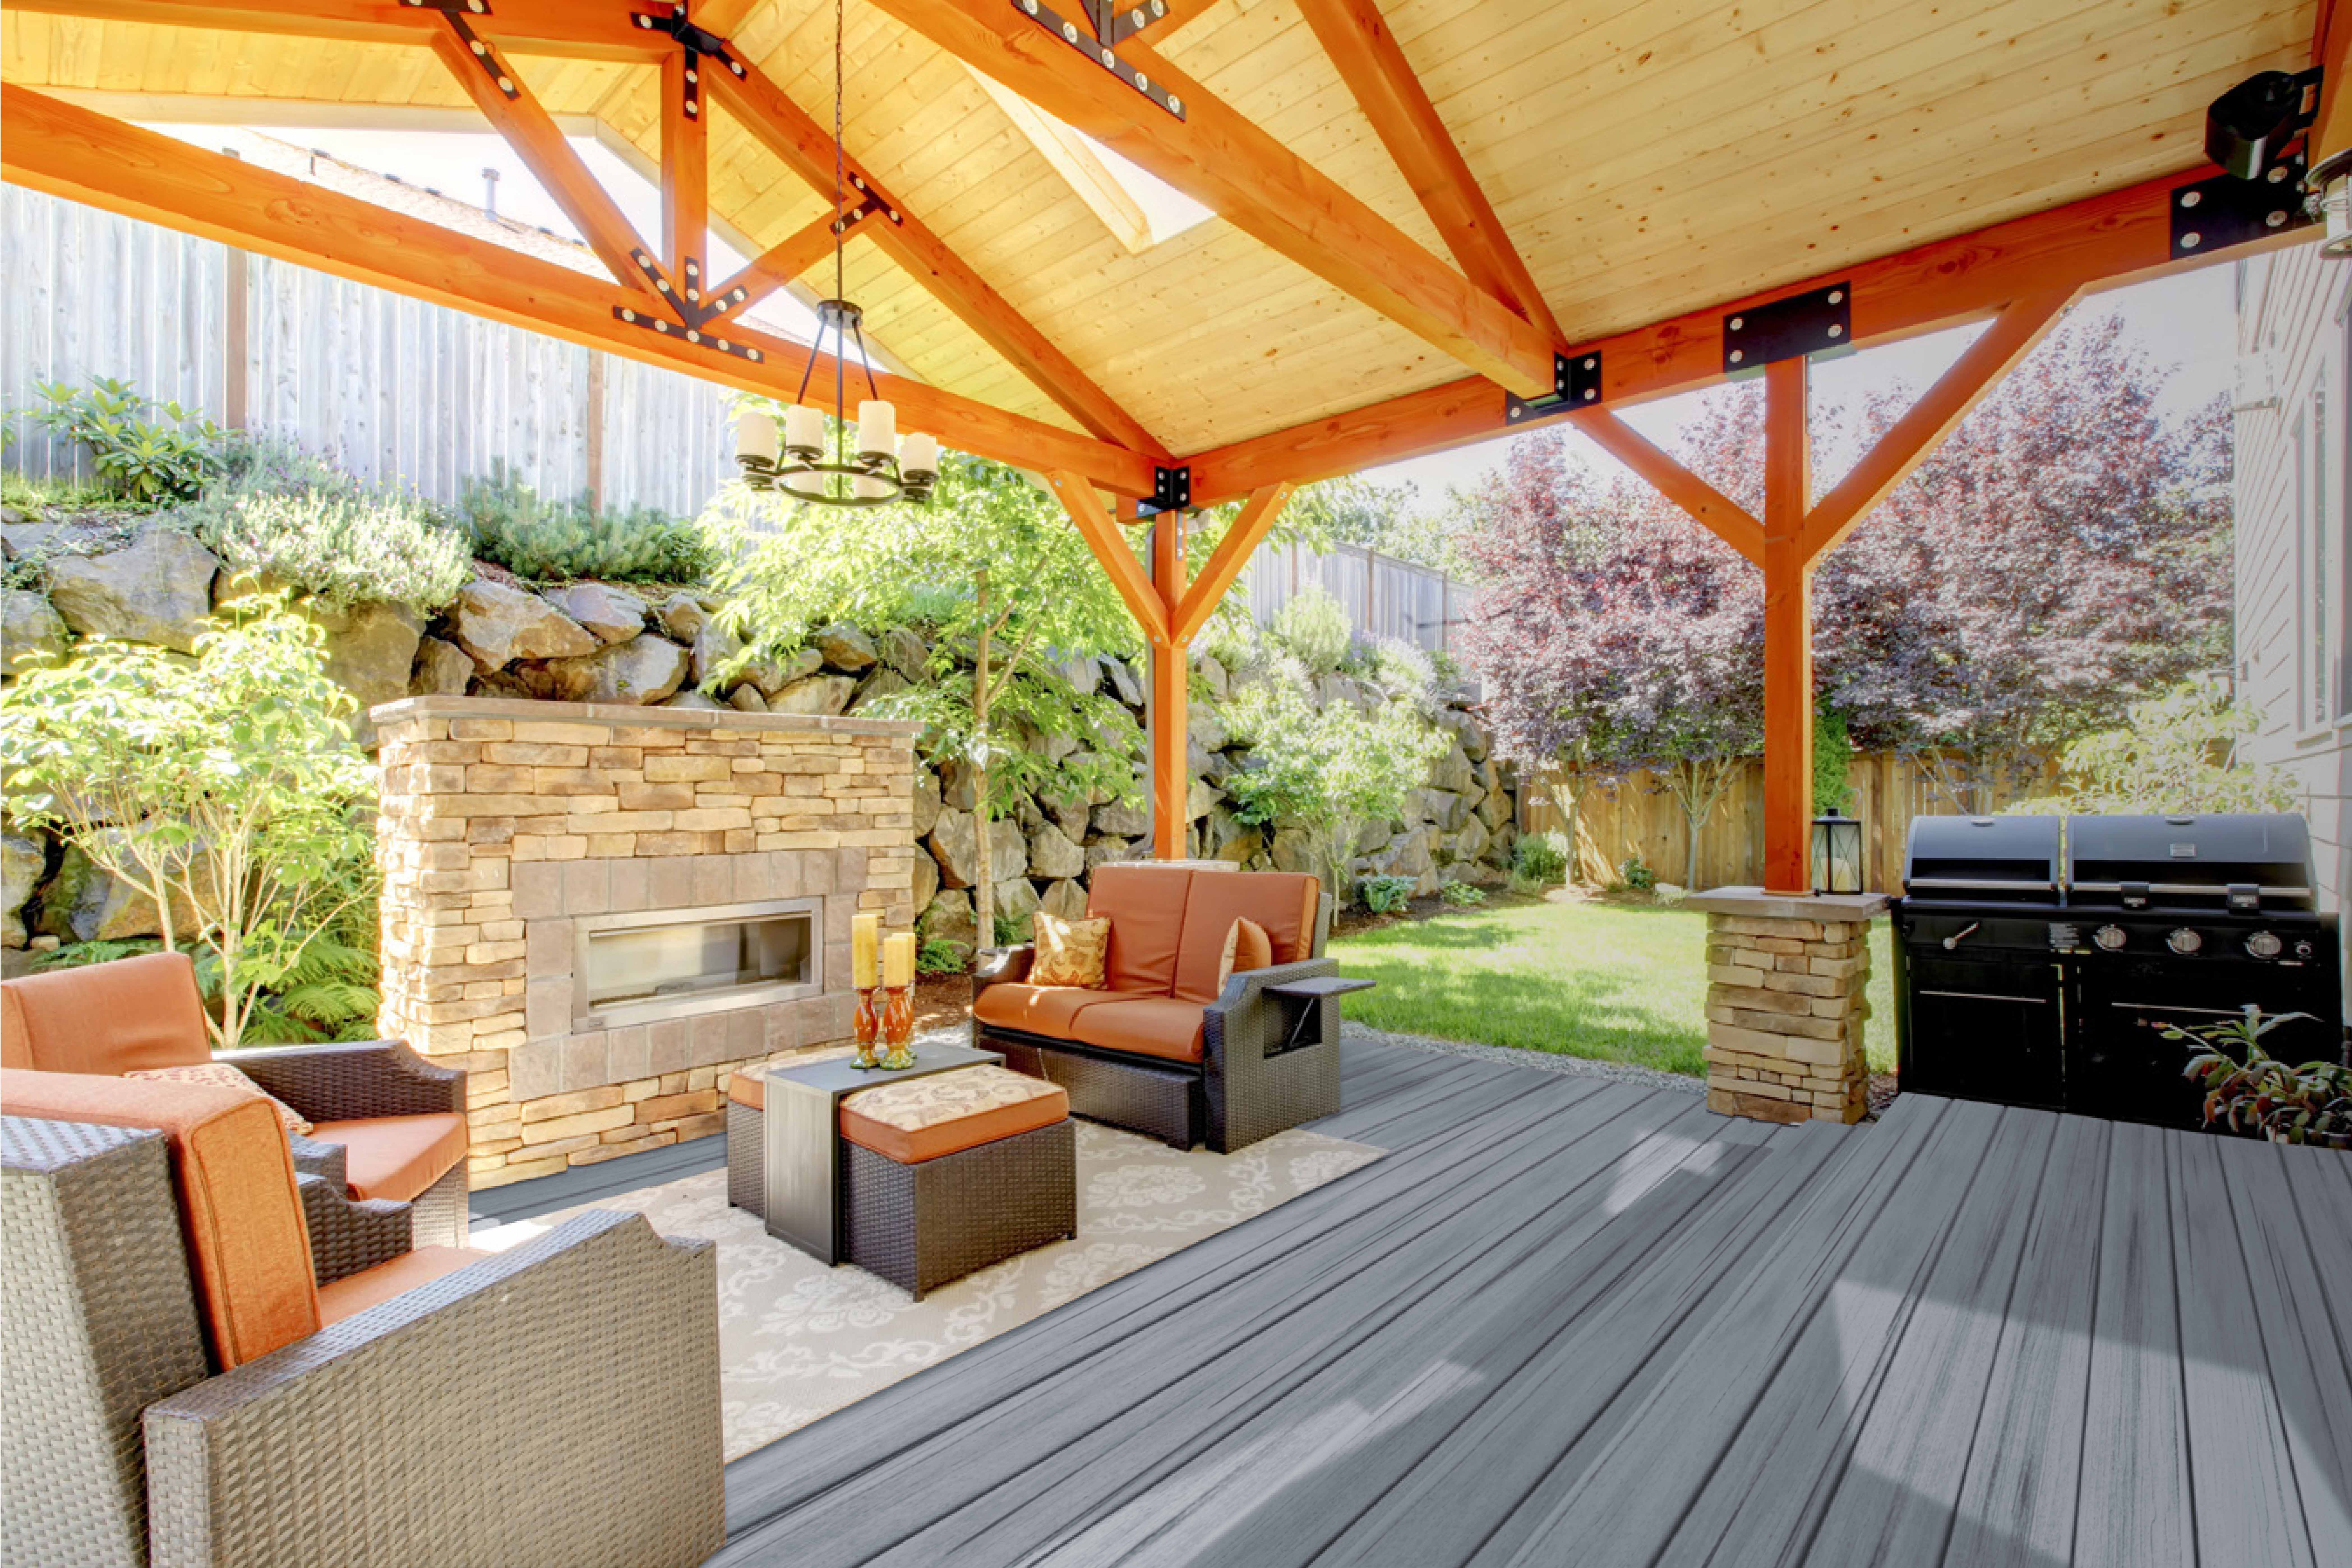 Elevate adds style and durability to any outdoor space and provides a budget-friendly option for homeowners to upgrade to the benefits of composites.